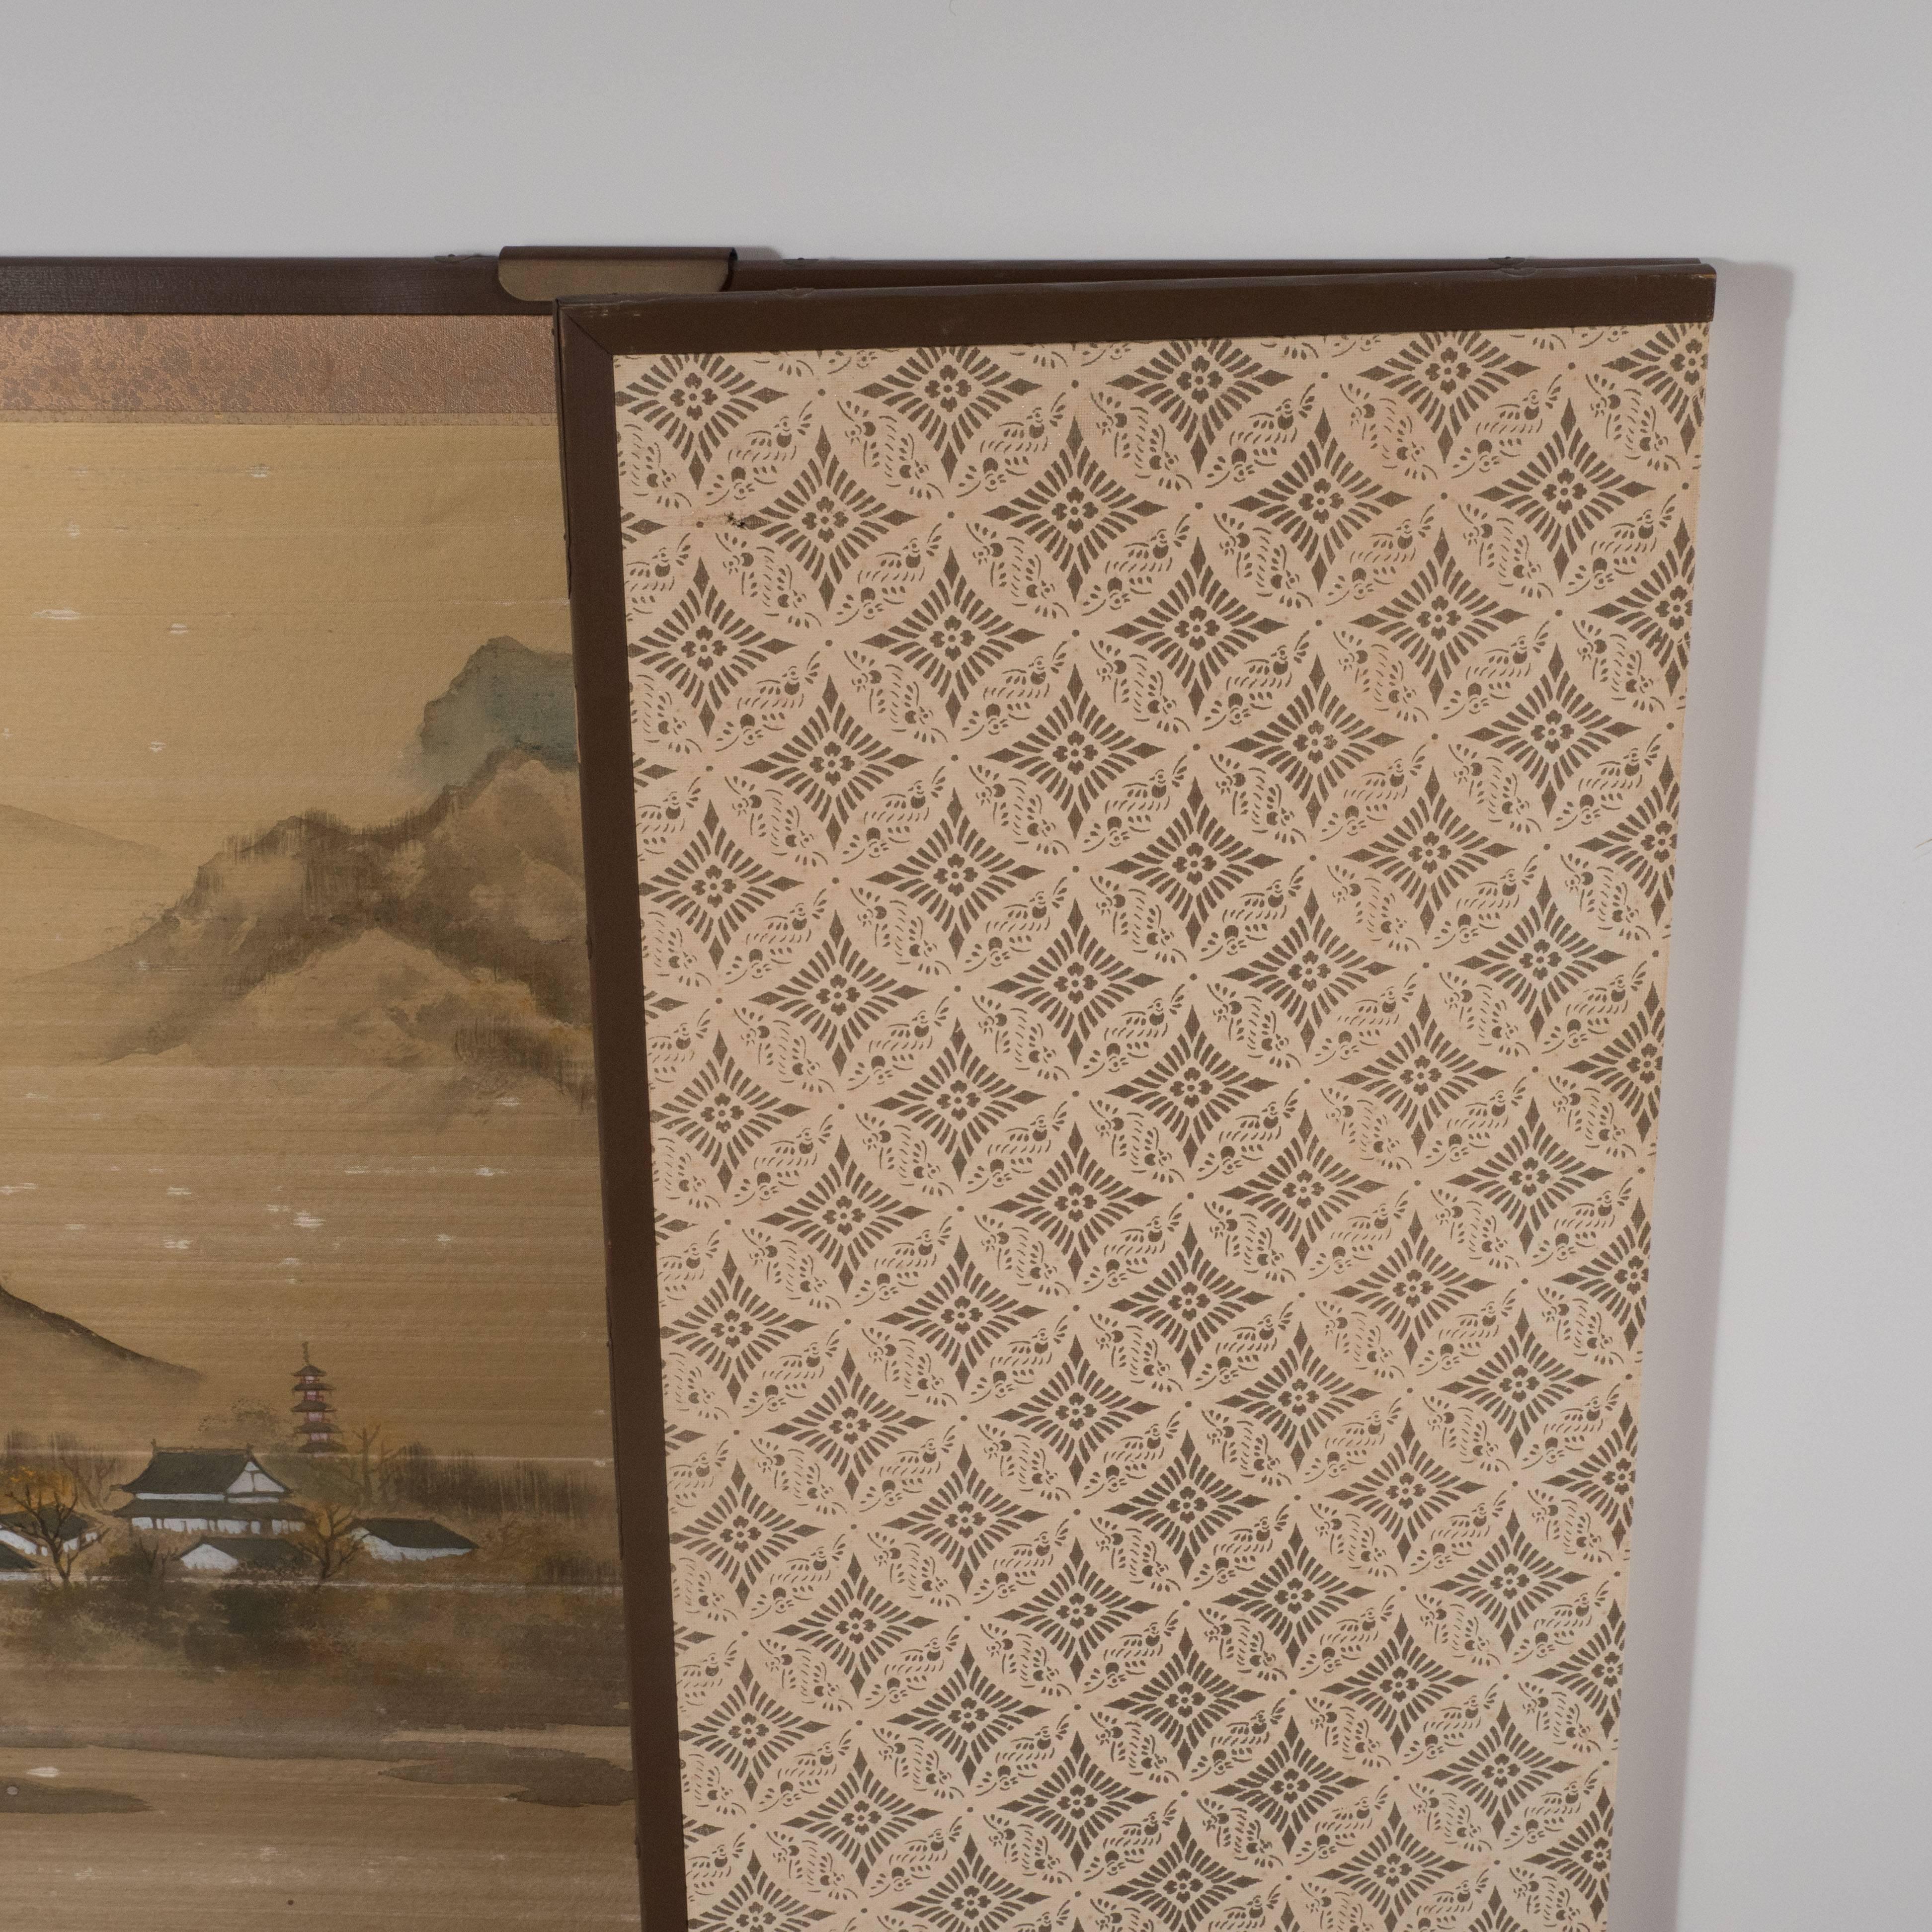 Art Deco Hand Painted Four Panel Japanese Screen with Mountain Motif - Brown Landscape Painting by Unknown